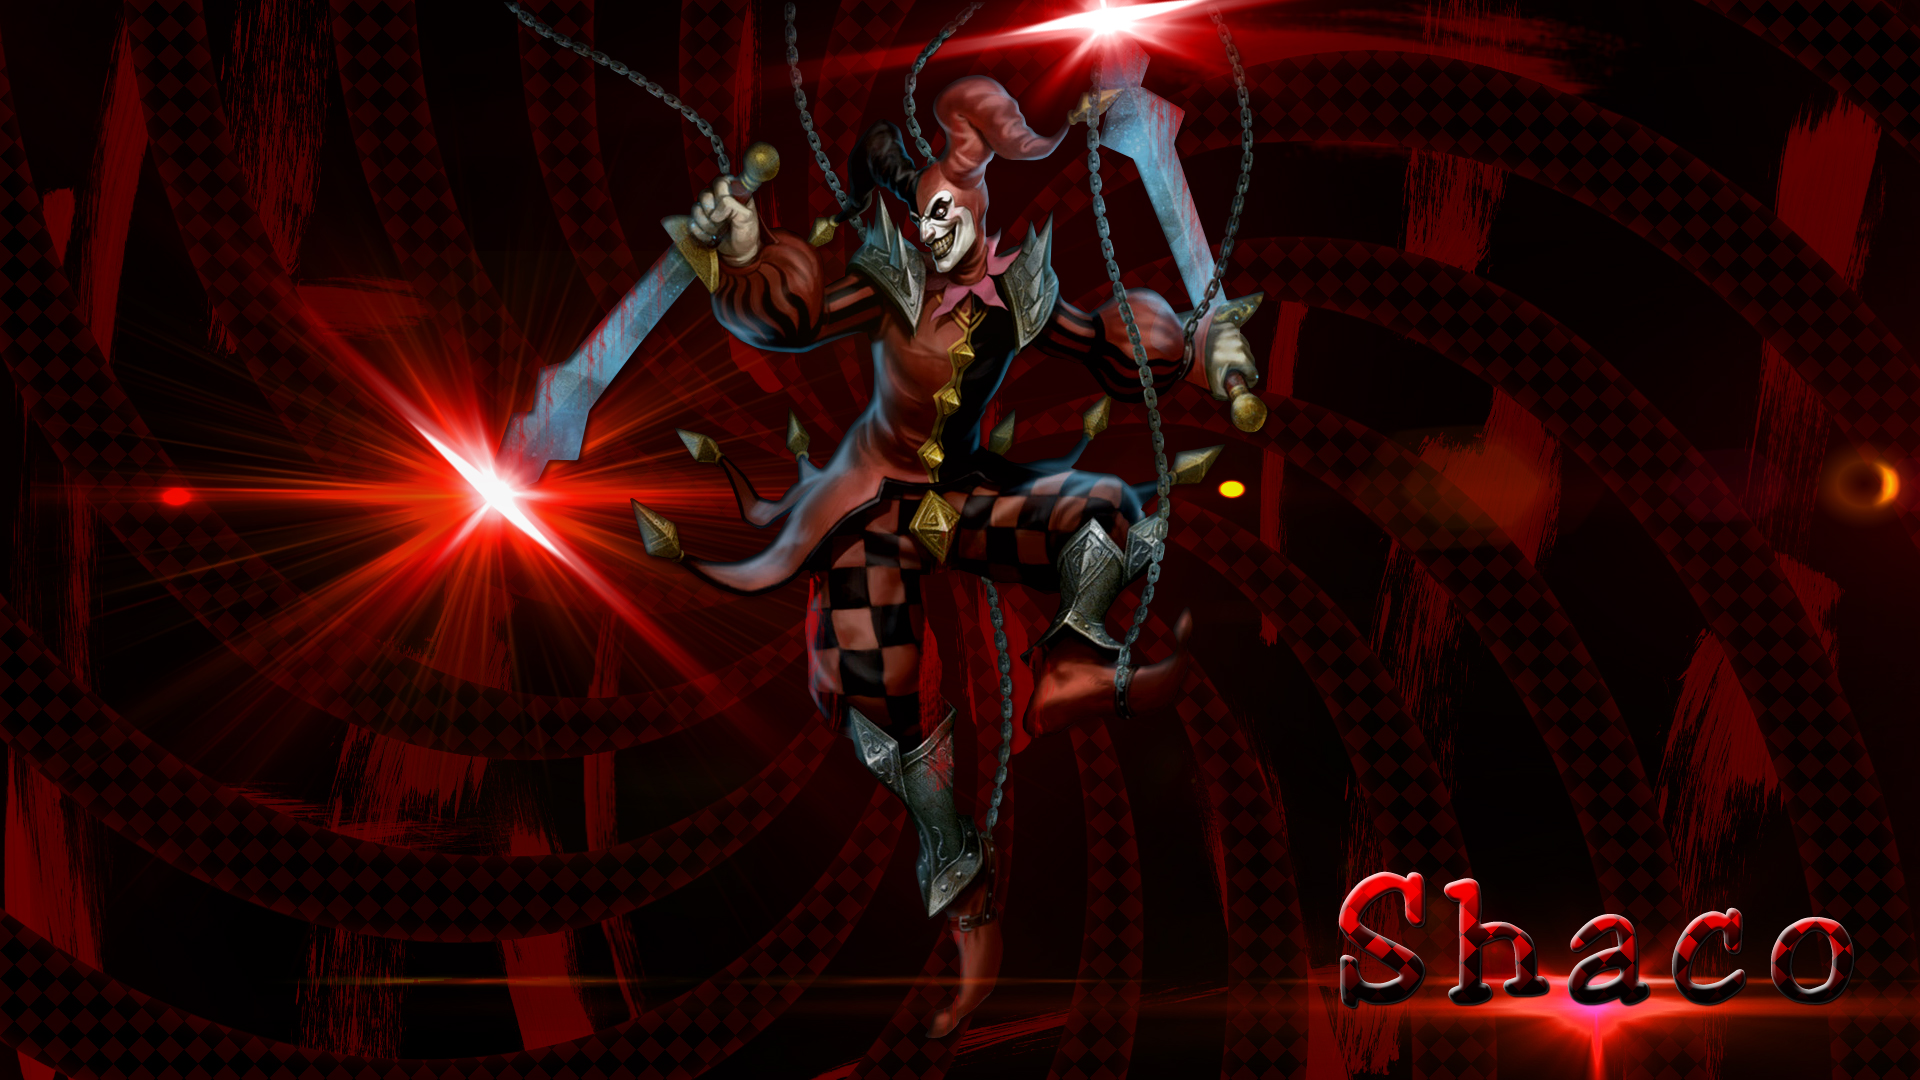 Shaco Wallpaper By Chipinators - League Of Legends Shaco , HD Wallpaper & Backgrounds